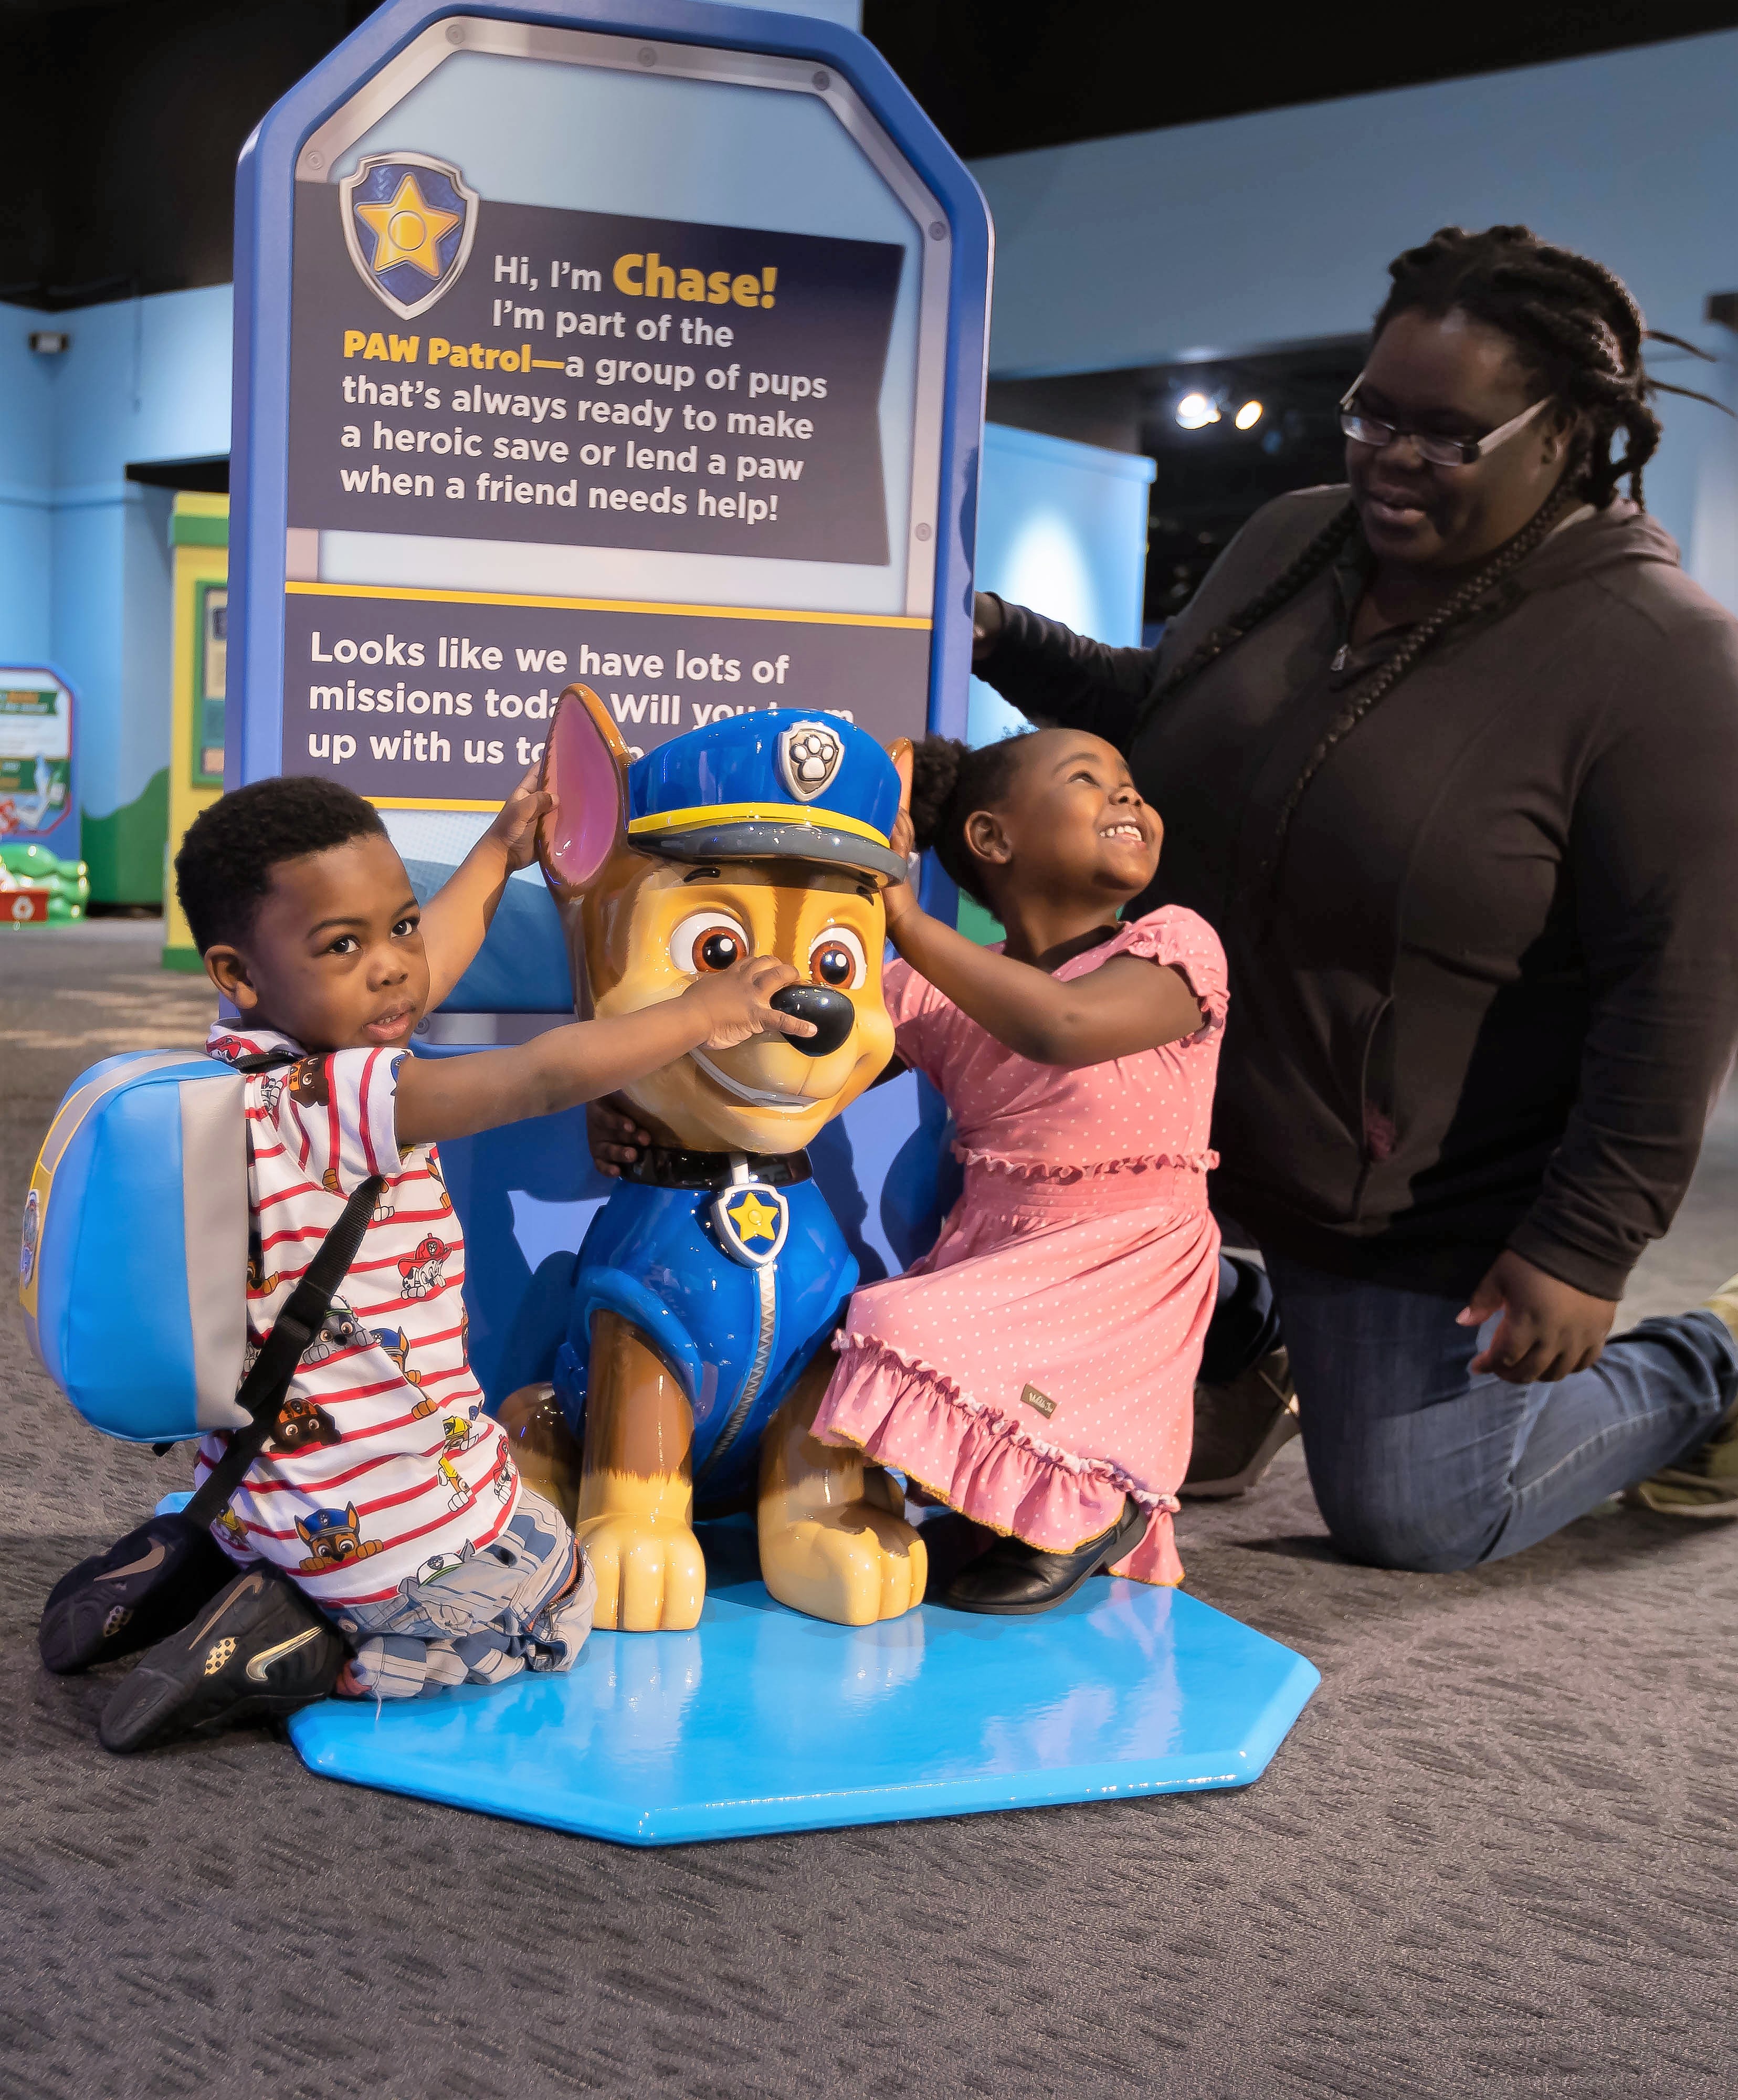 Chase is on the case at The Children's Museum of Indianapolis